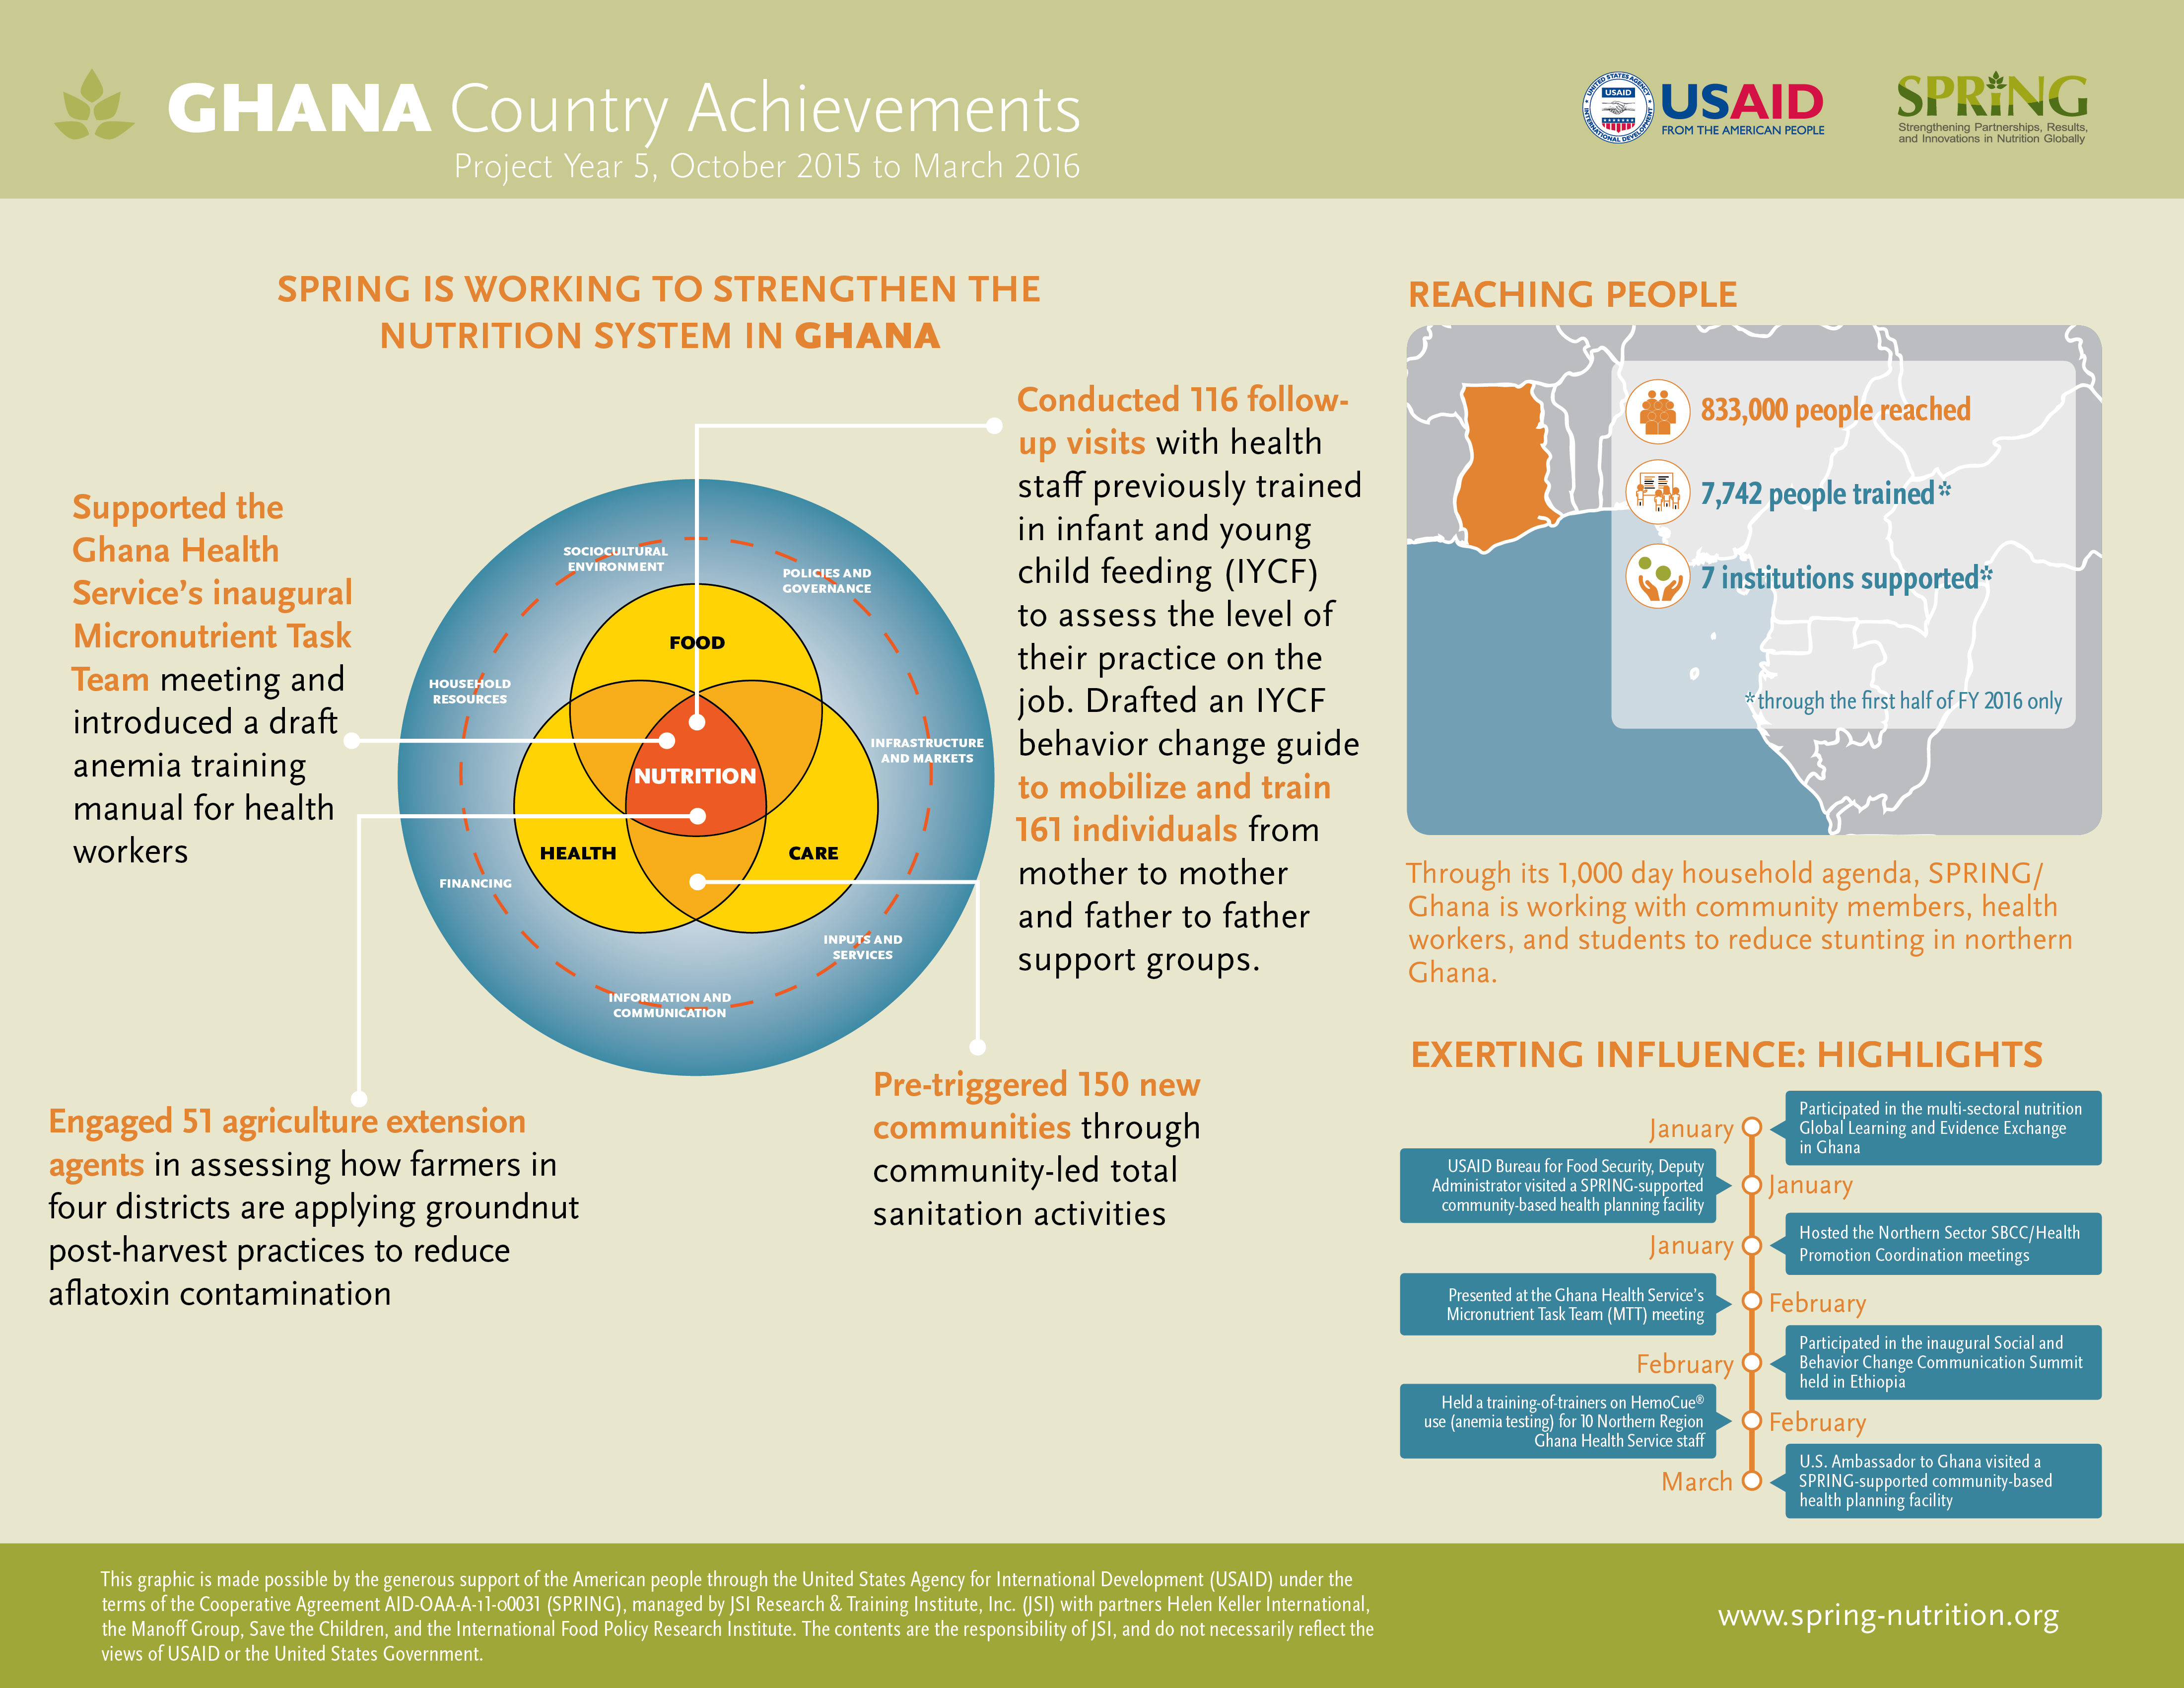 Ghana Country Achievements, Project Year 5, October 2015 to March 2016